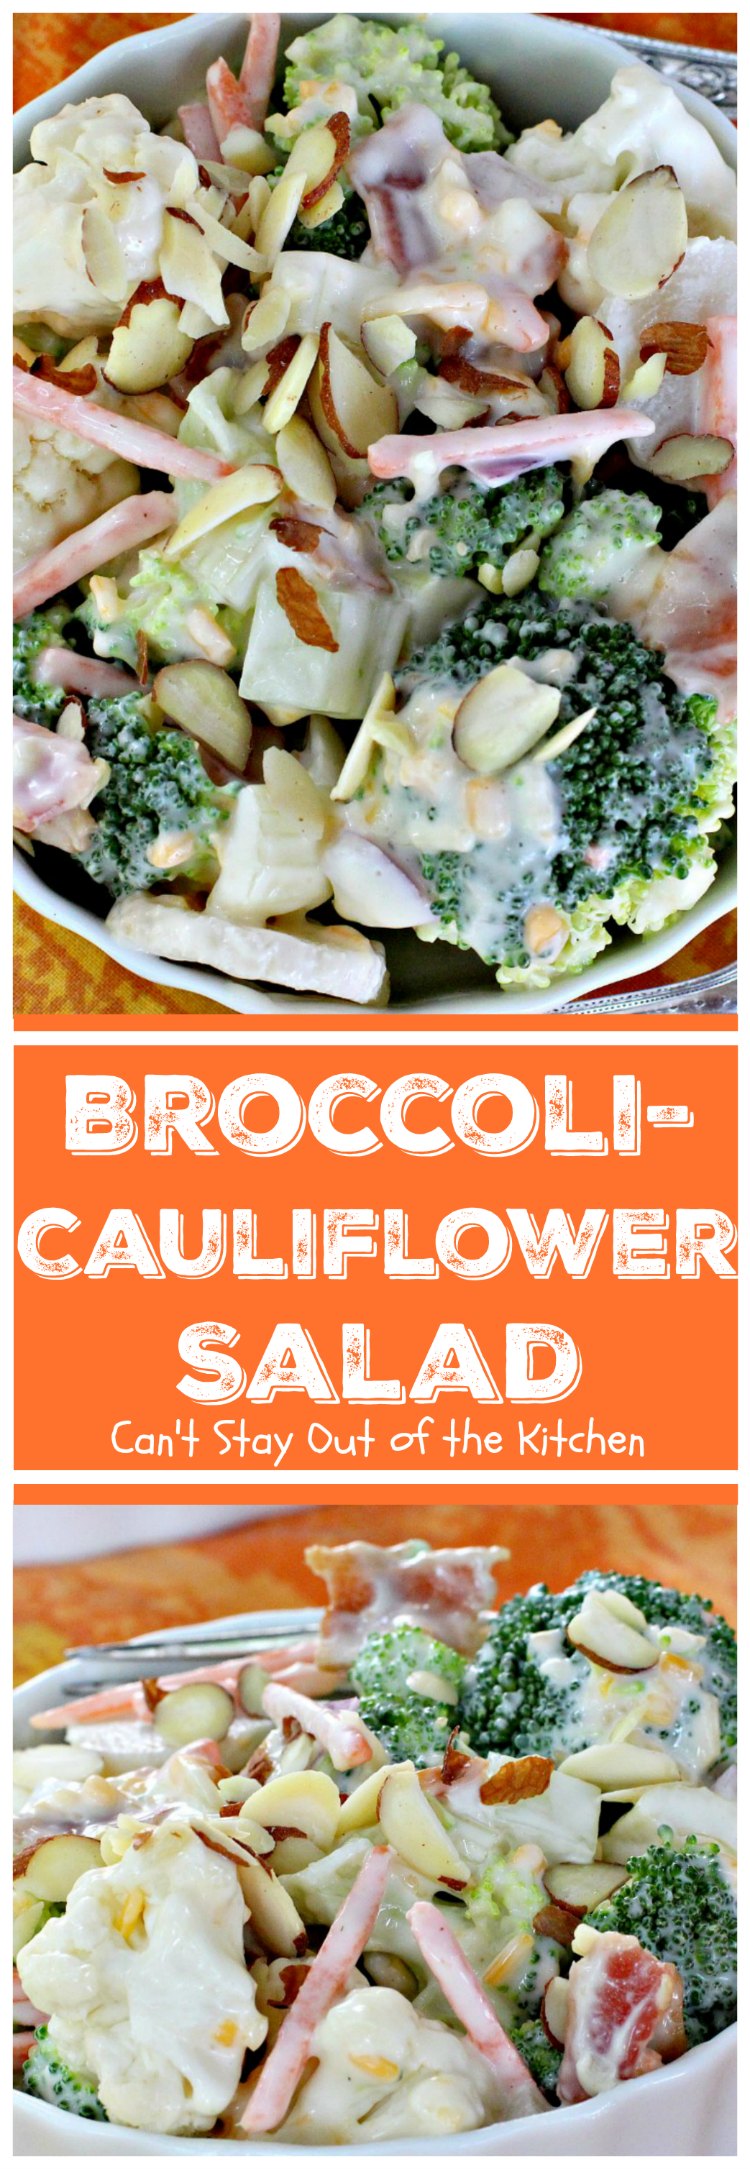 Broccoli-Cauliflower Salad | Can't Stay Out of the KitchenBroccoli-Cauliflower Salad | Can't Stay Out of the Kitchen